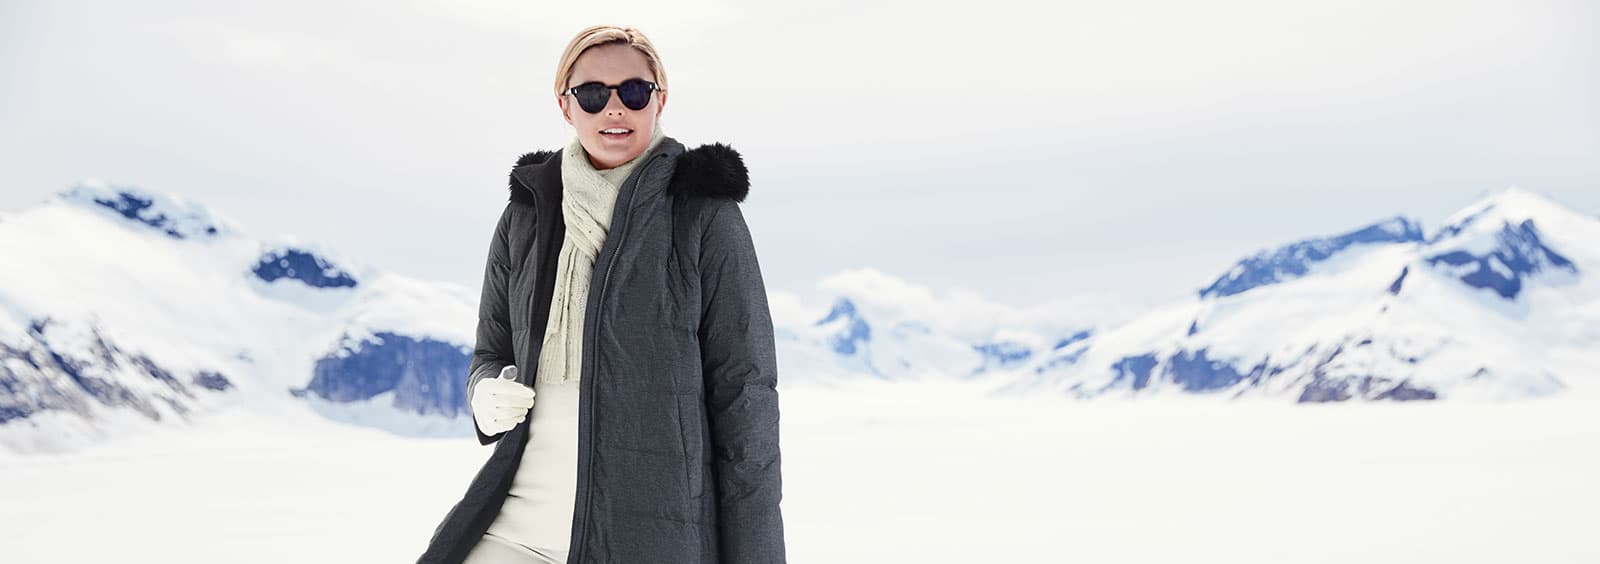 Best Women's Winter Coats for Extreme Cold During a Blizzard